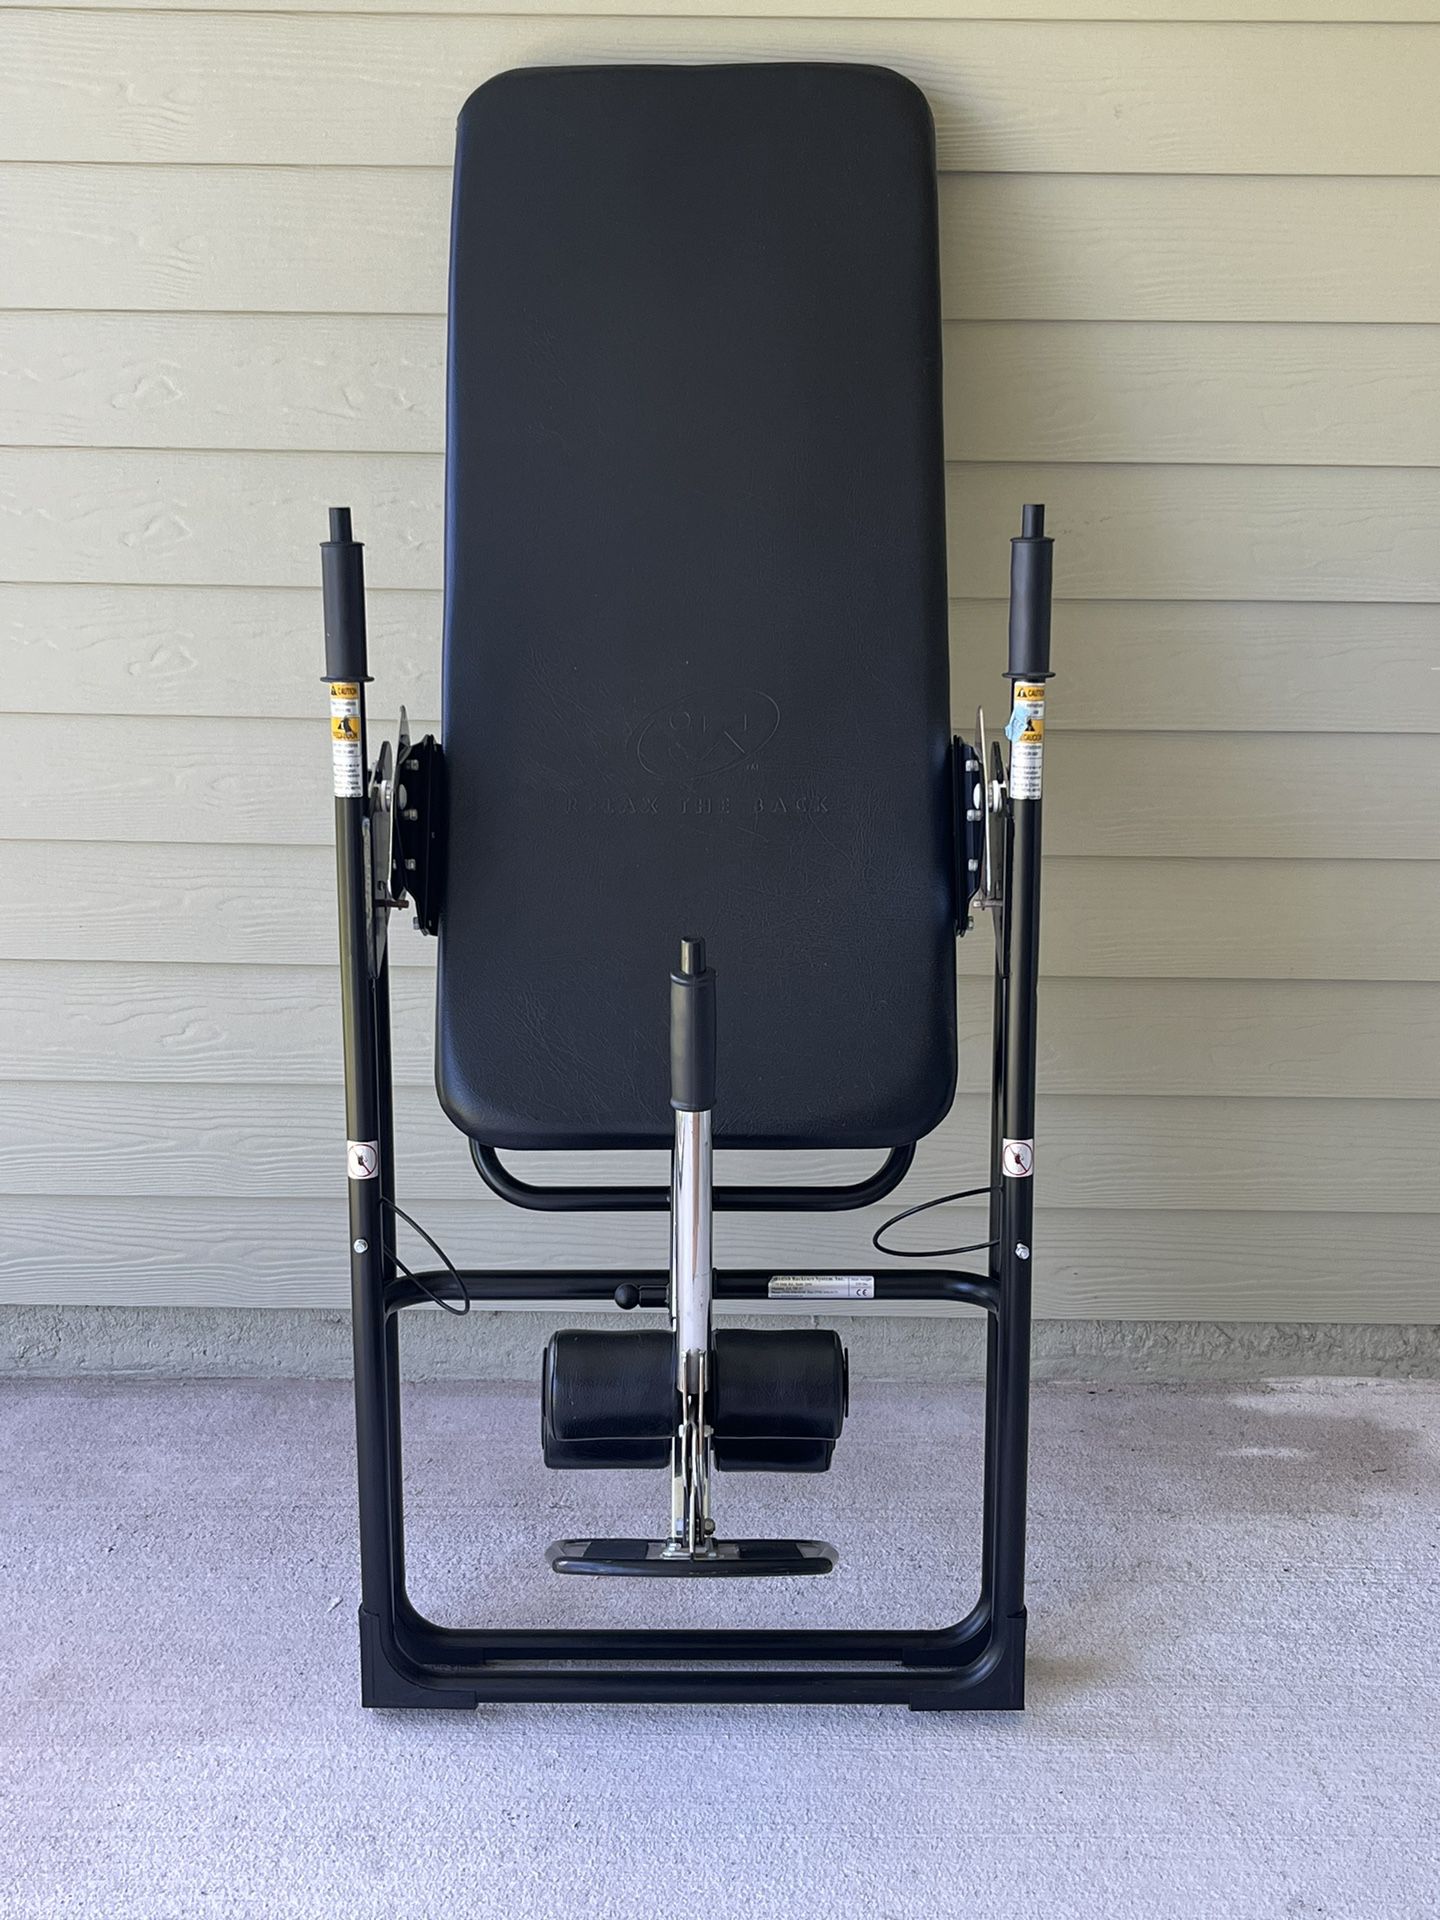 Mastercare Relax The Back , Black Inversion Table .